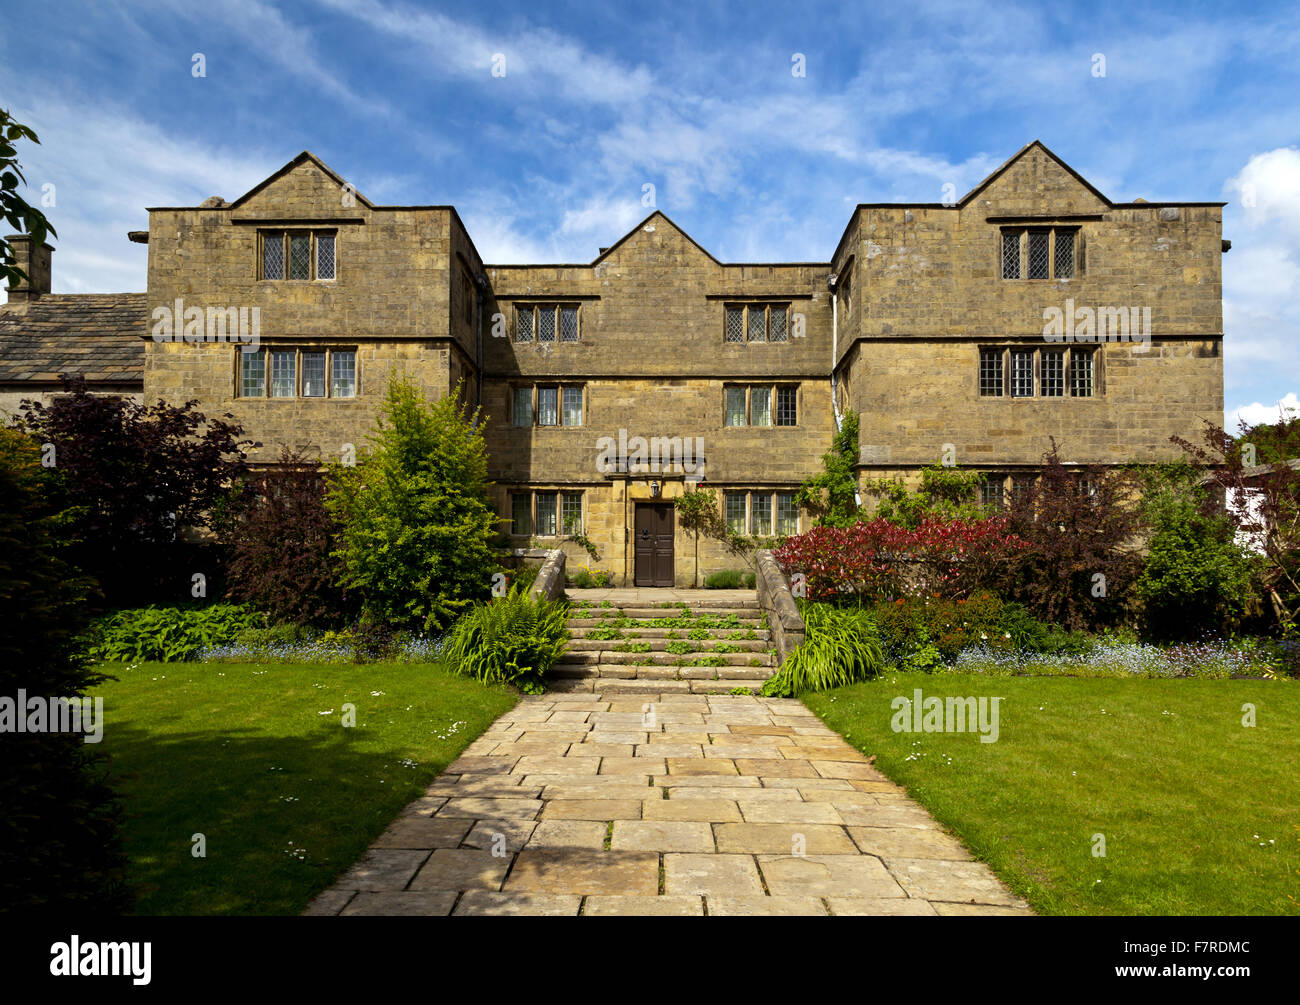 The front of Eyam Hall and Craft Centre, Derbyshire. Eyam Hall is an unspoilt example of a gritstone Jacobean manor house, set within a walled garden. Stock Photo